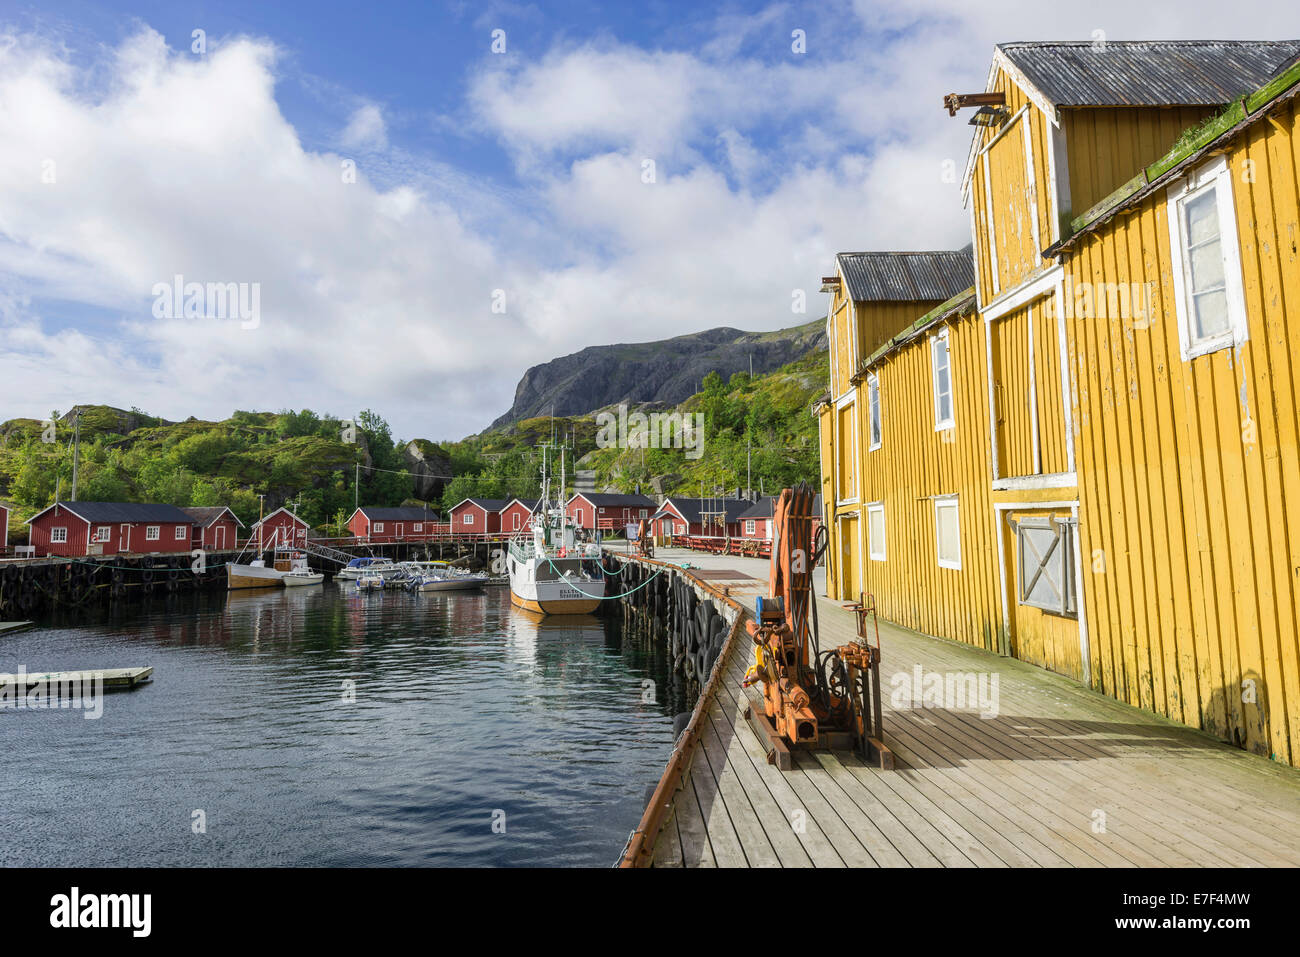 Warehouse and Rorbuer fishermen's cabins in the port of Nusfjord, Lofoten, Nordland, Norway Stock Photo